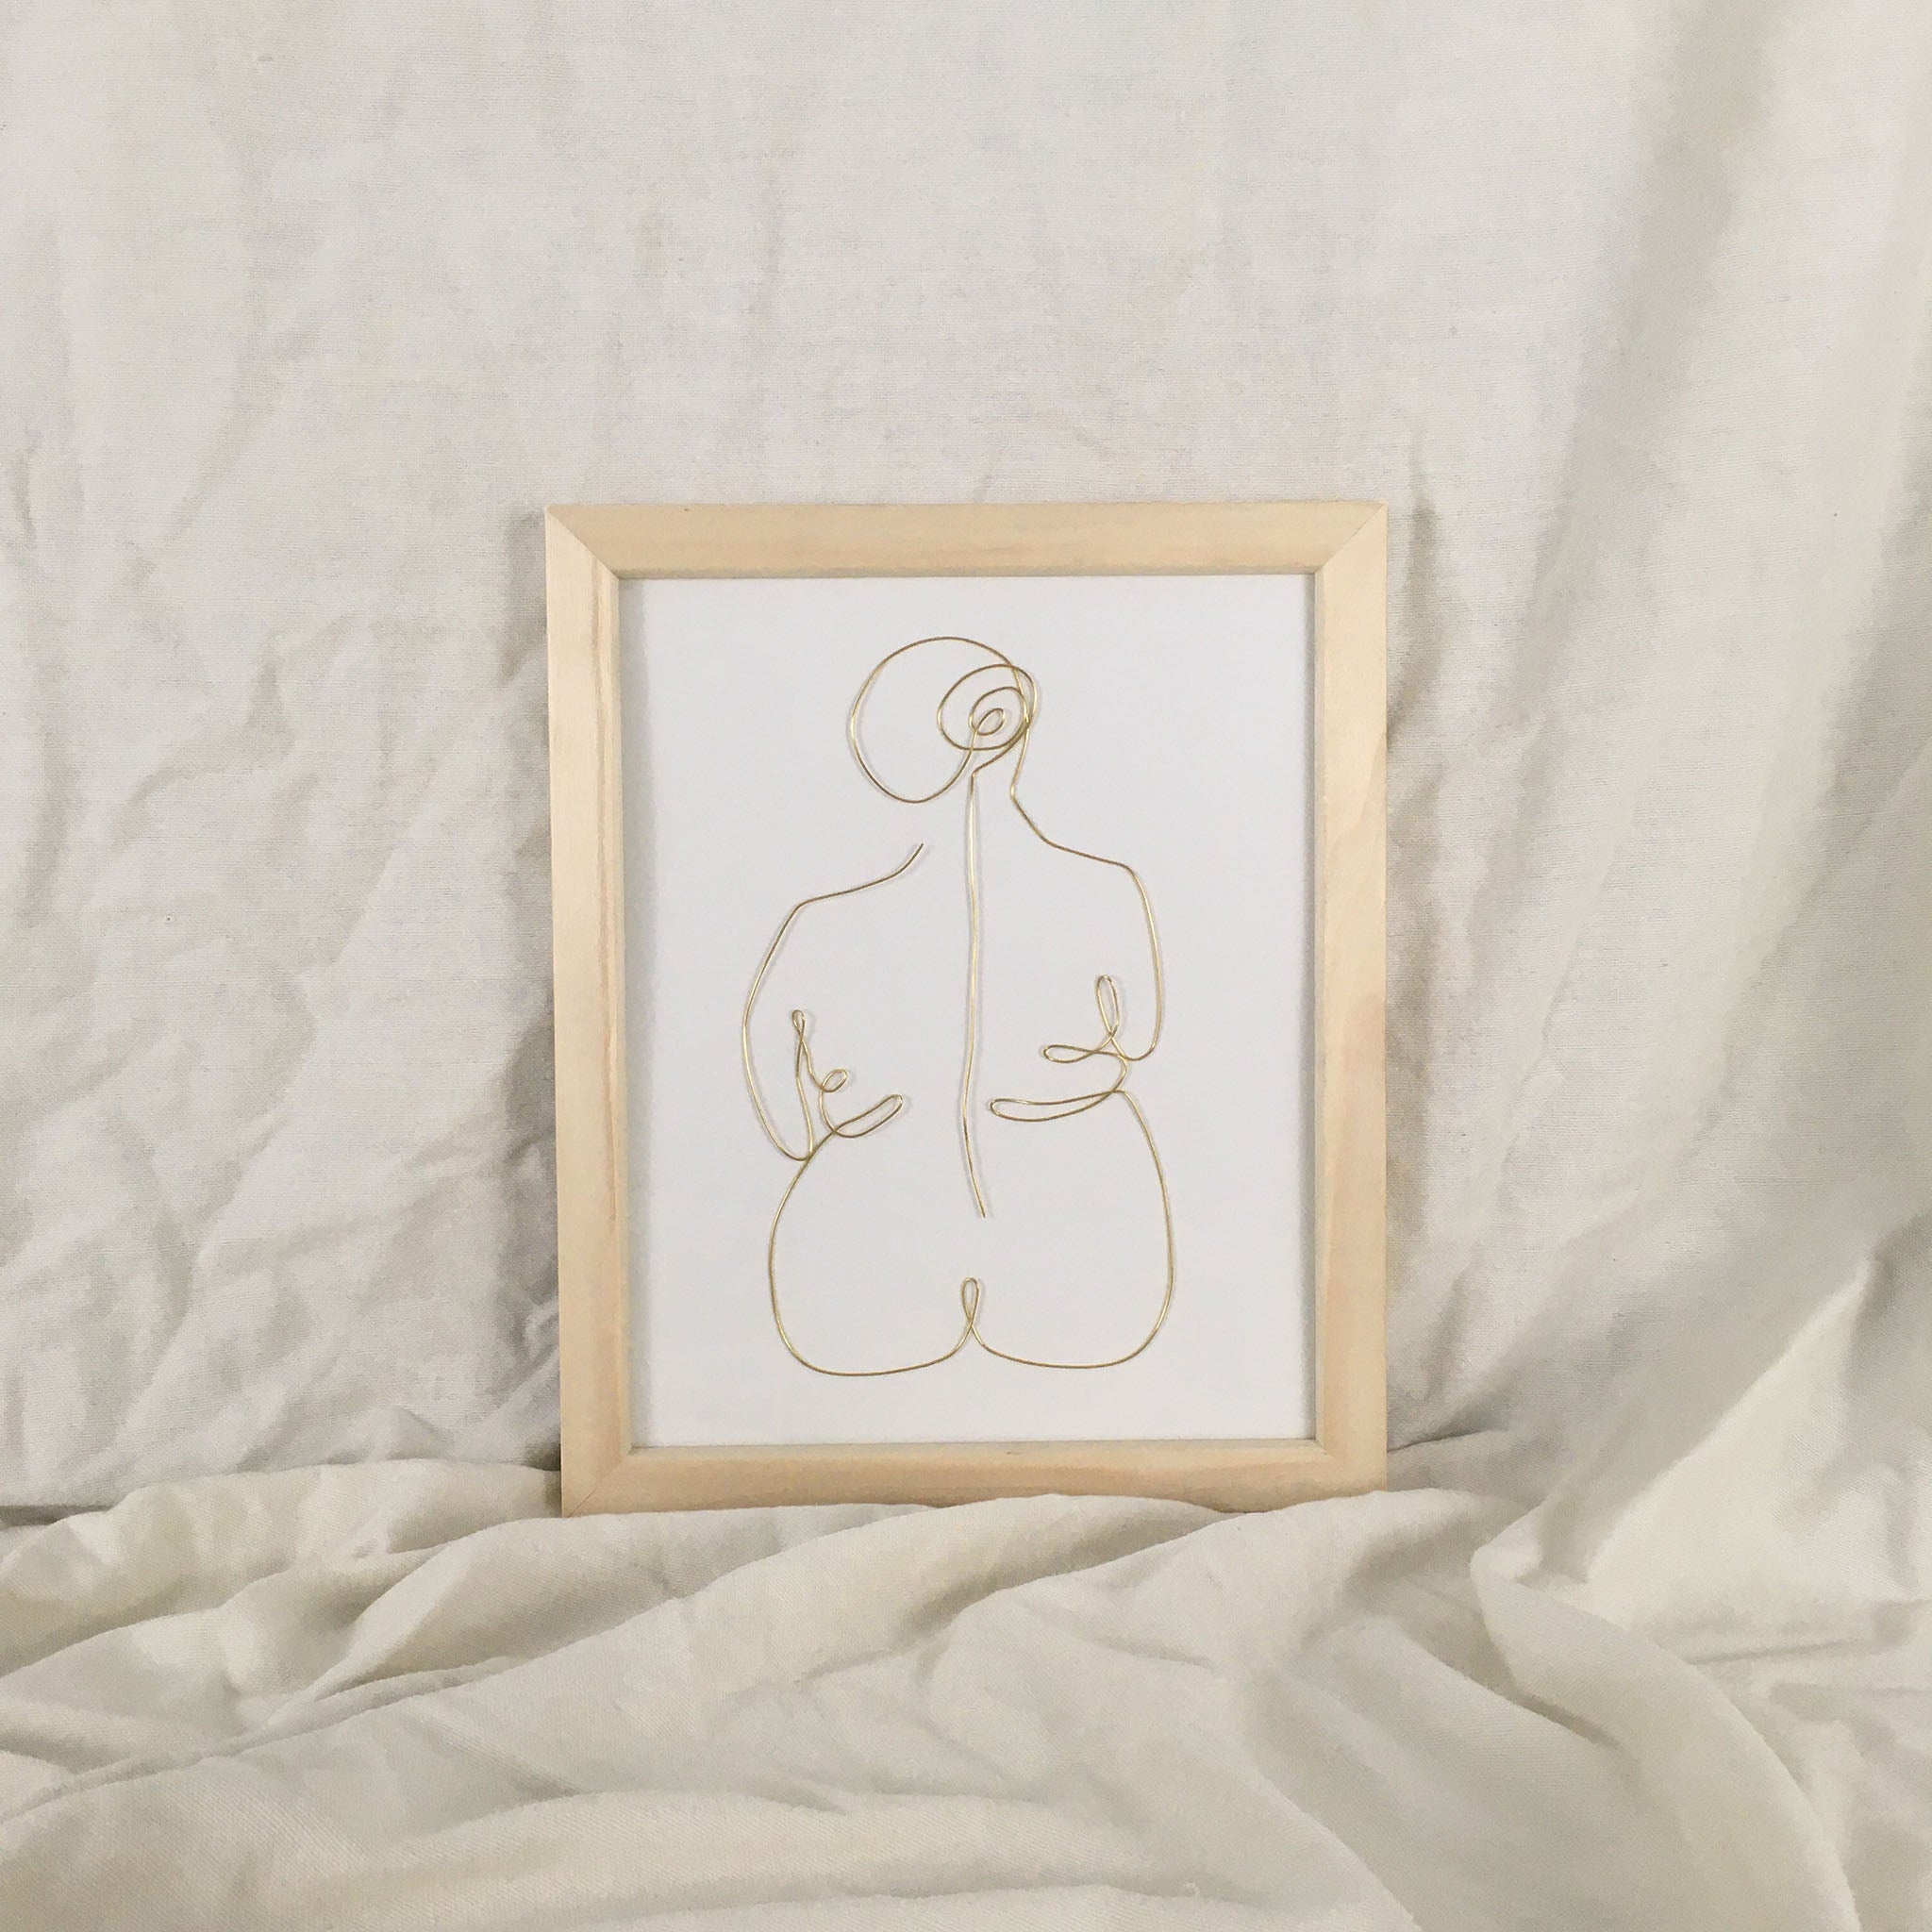 Lounge wire art - natural frame gold wire